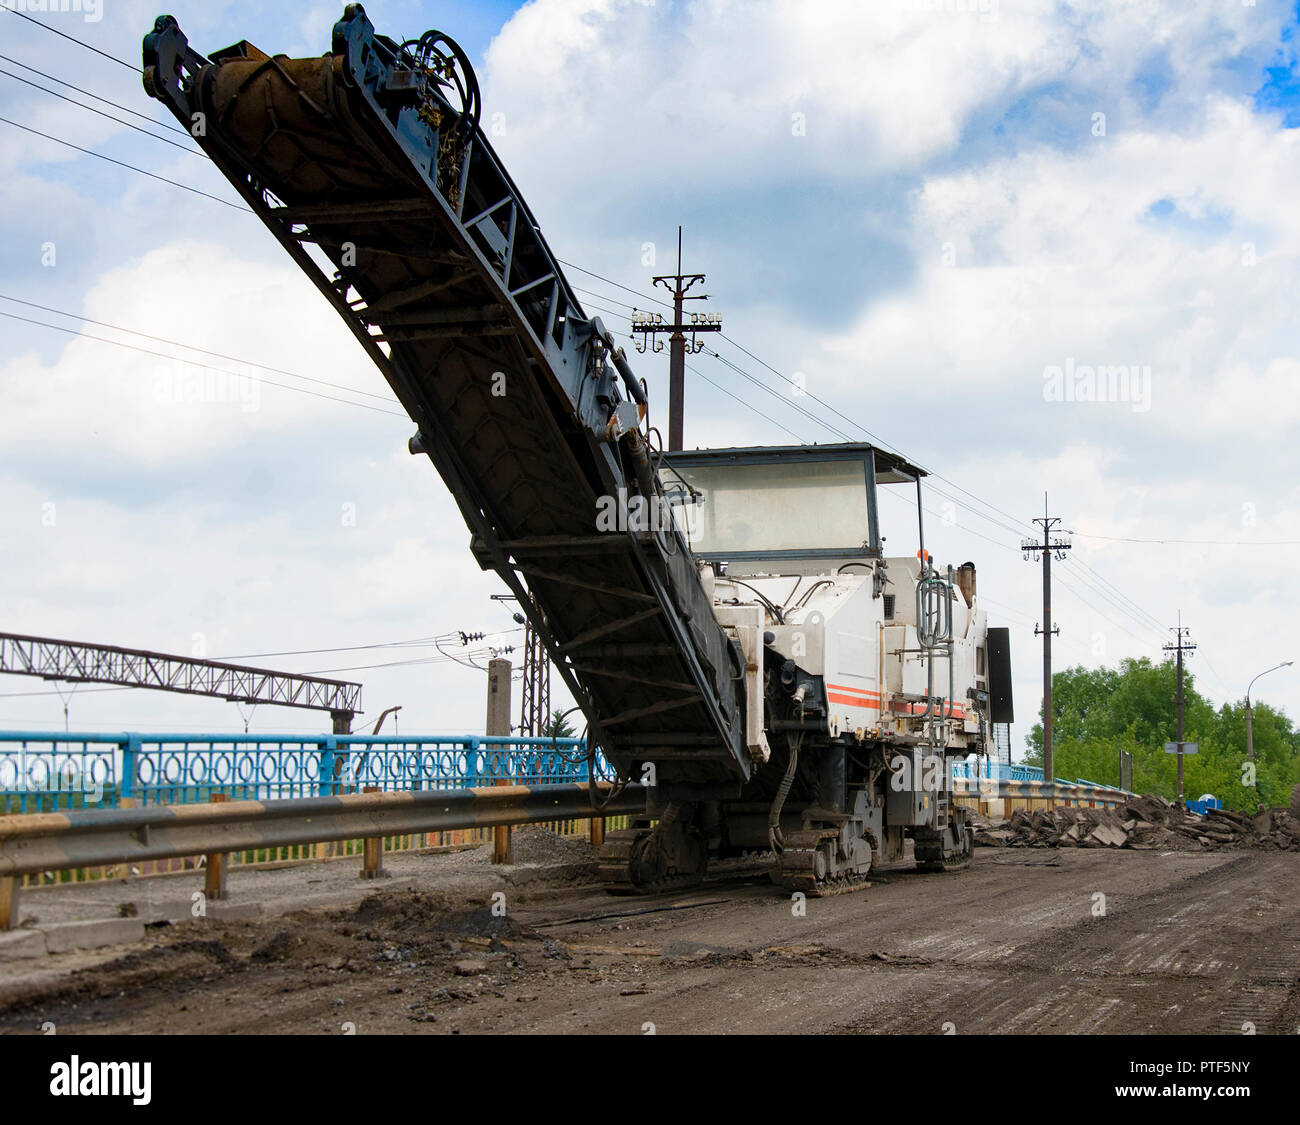 The machine is cutting asphalt, cutting old asphalt with a special machine. Repair of roads, replacement of asvalt, construction work. Stock Photo